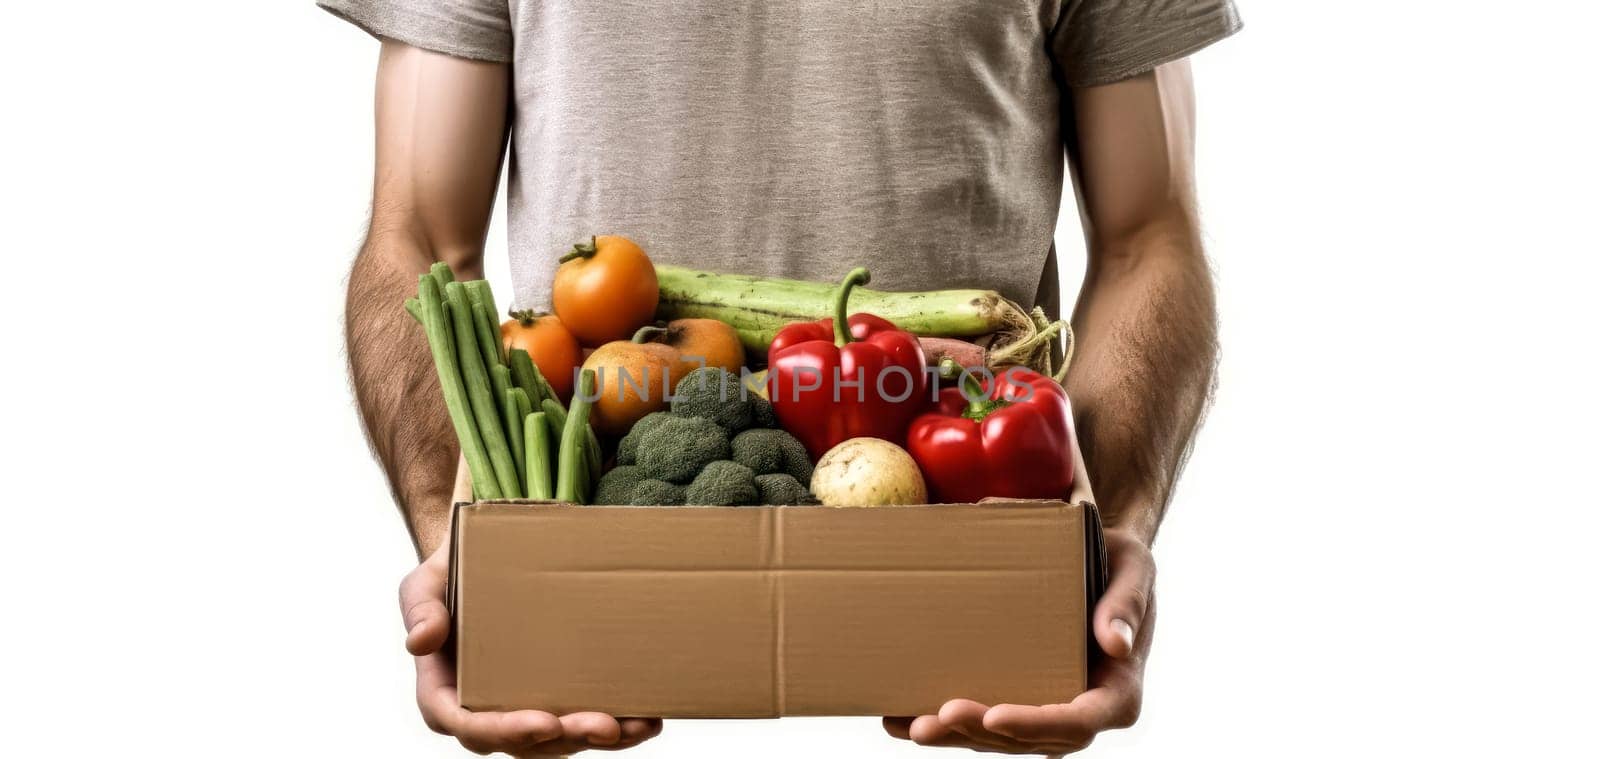 A man is holding a box of vegetables. The box contains broccoli, carrots, and peppers